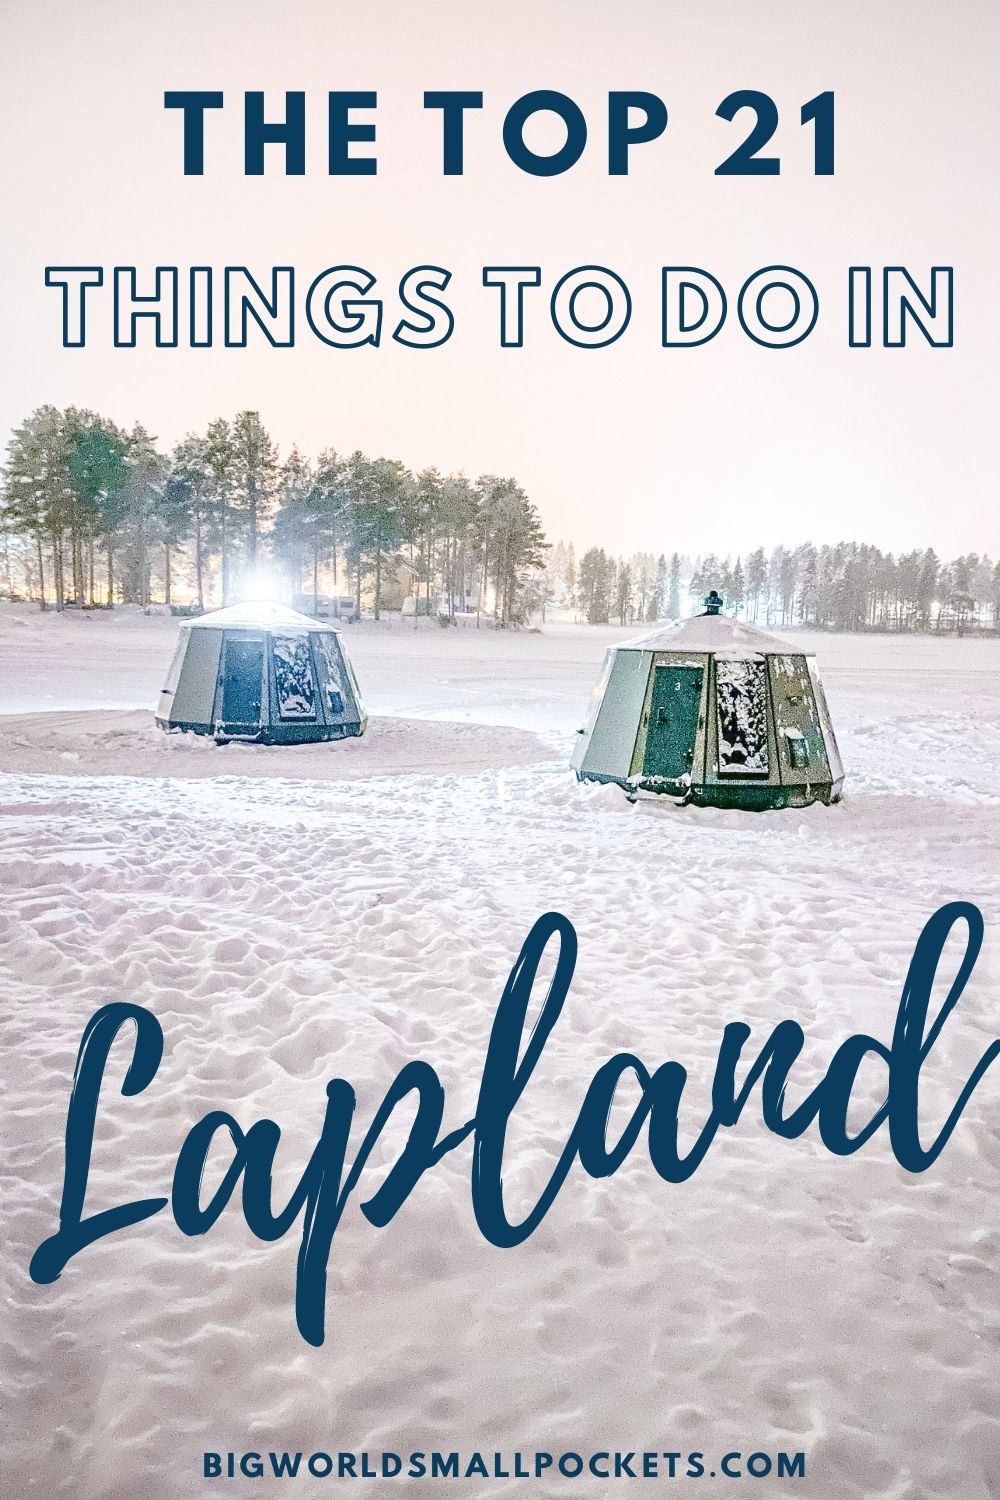 Top 21 Things to Do in Lapland, Finland